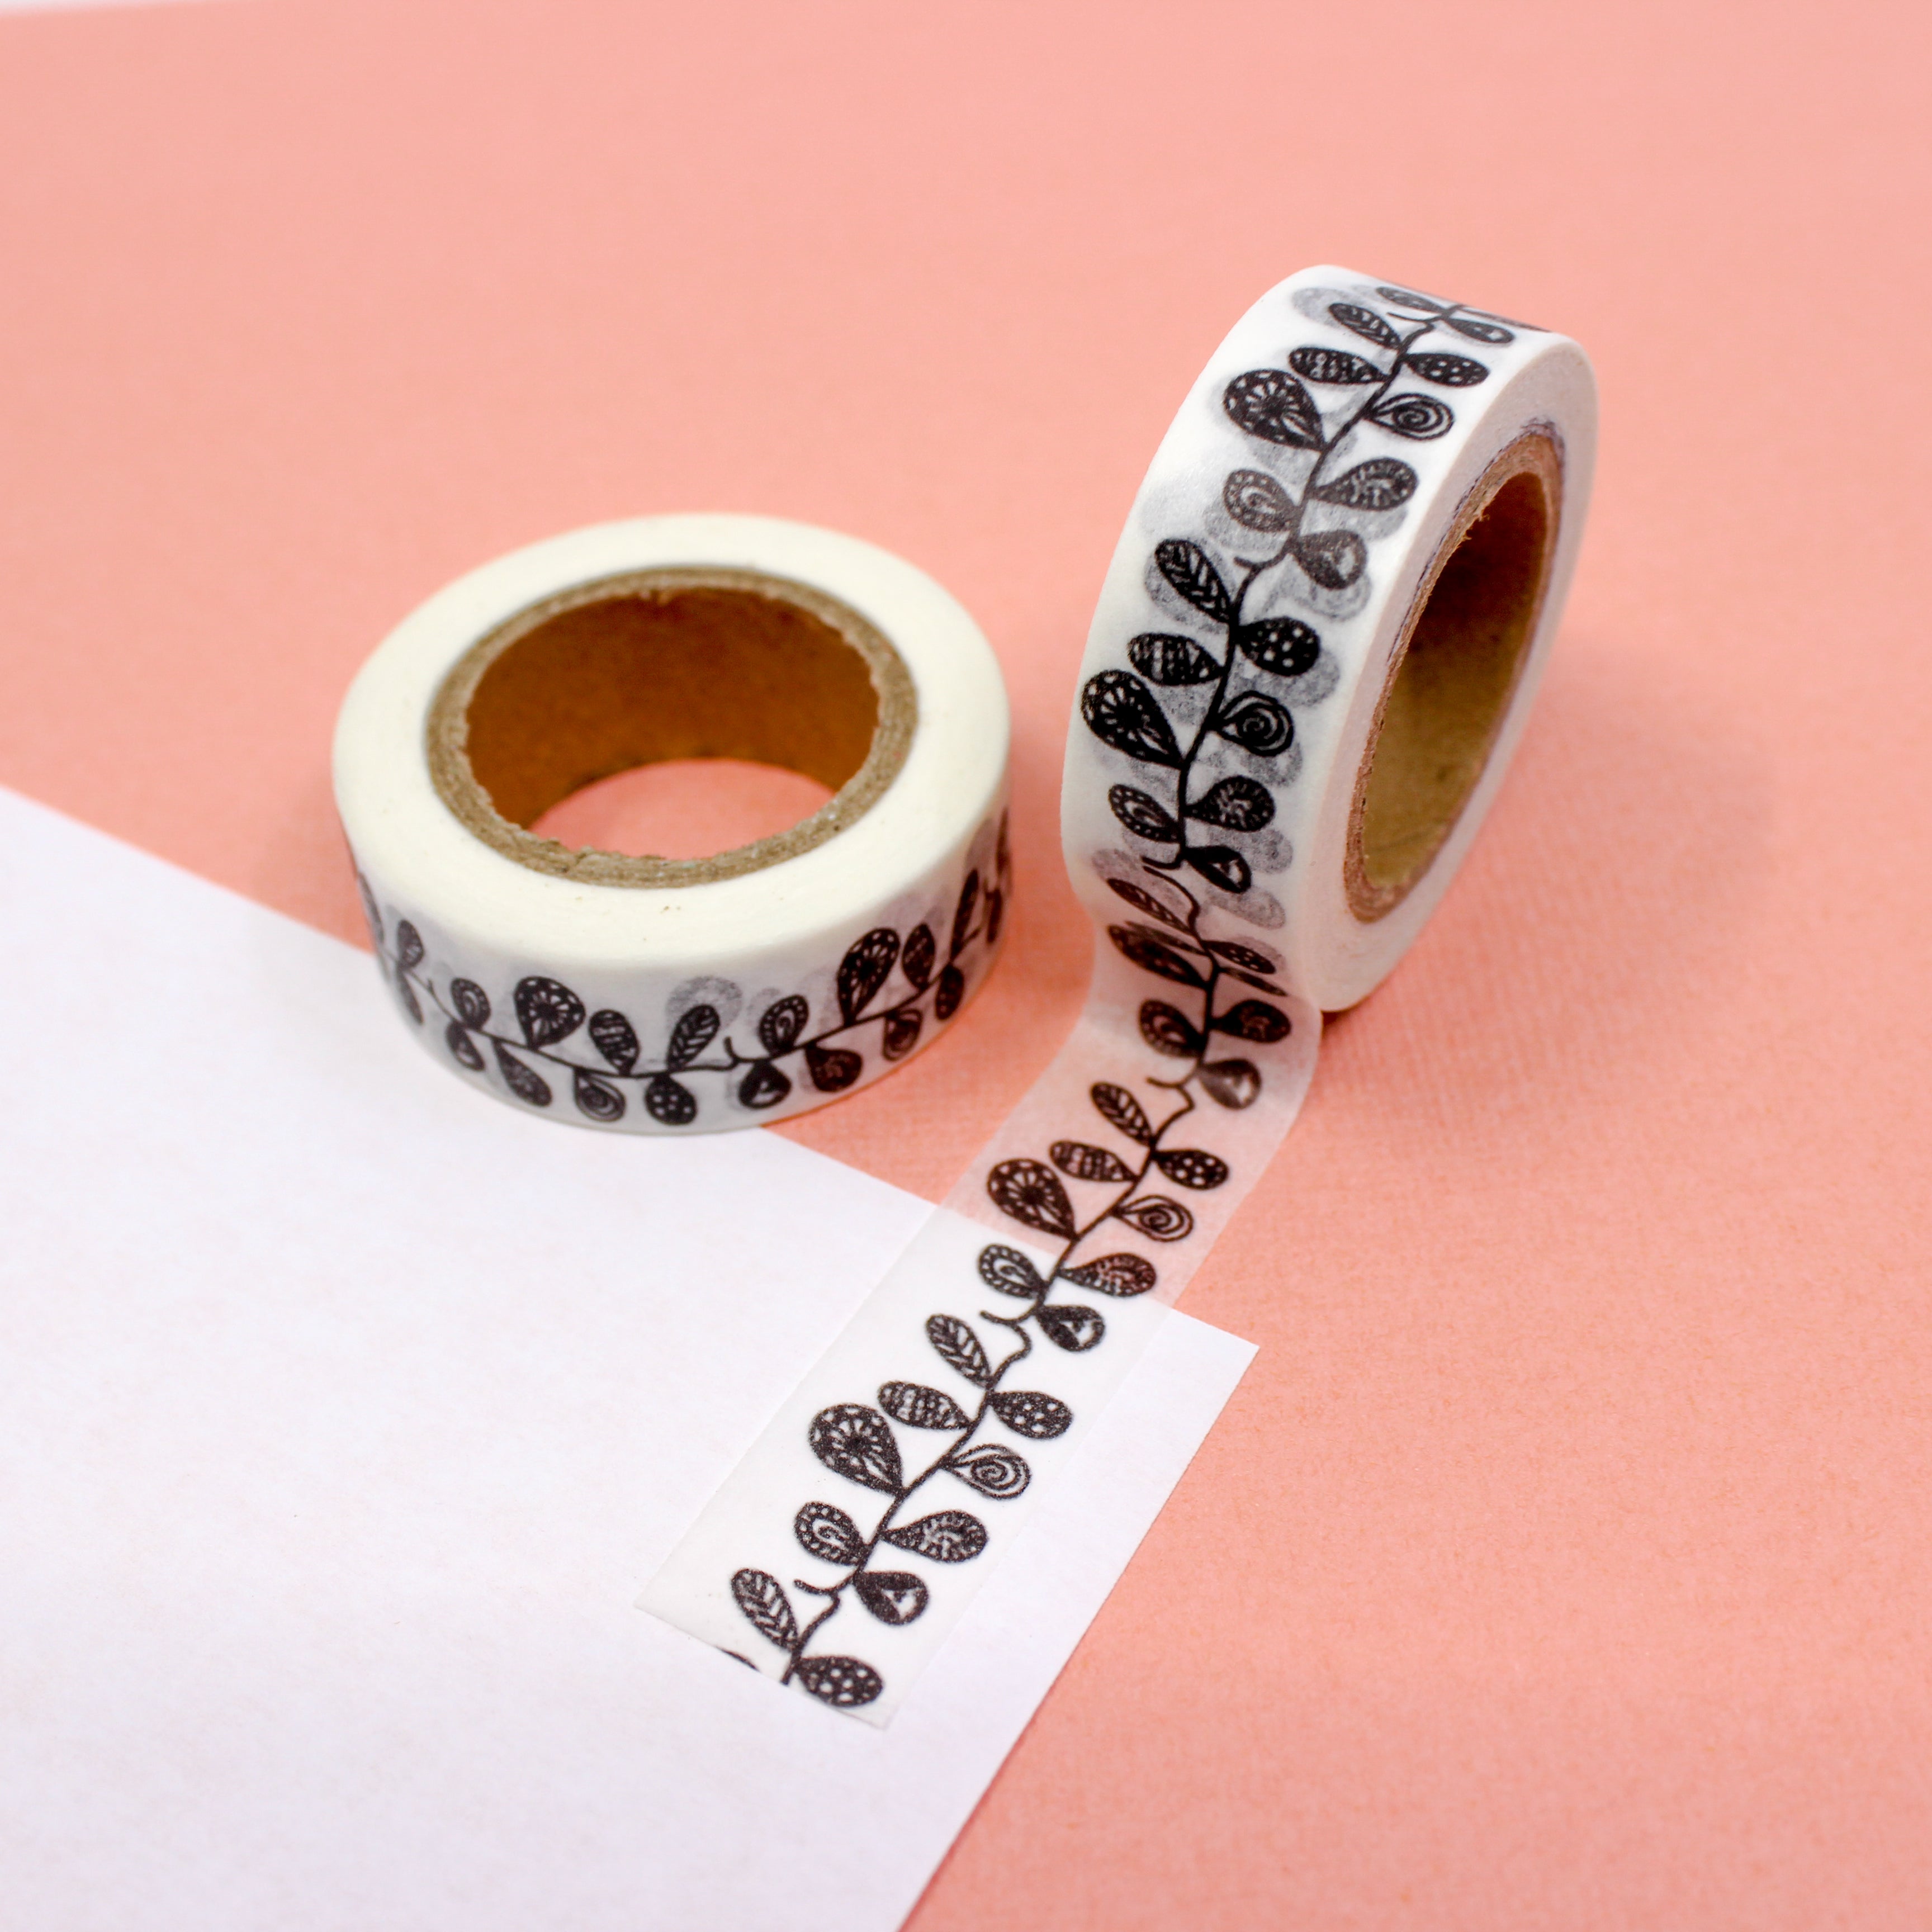 This is a black sketchy vines pattern washi tape from BBB Supplies Craft Shop